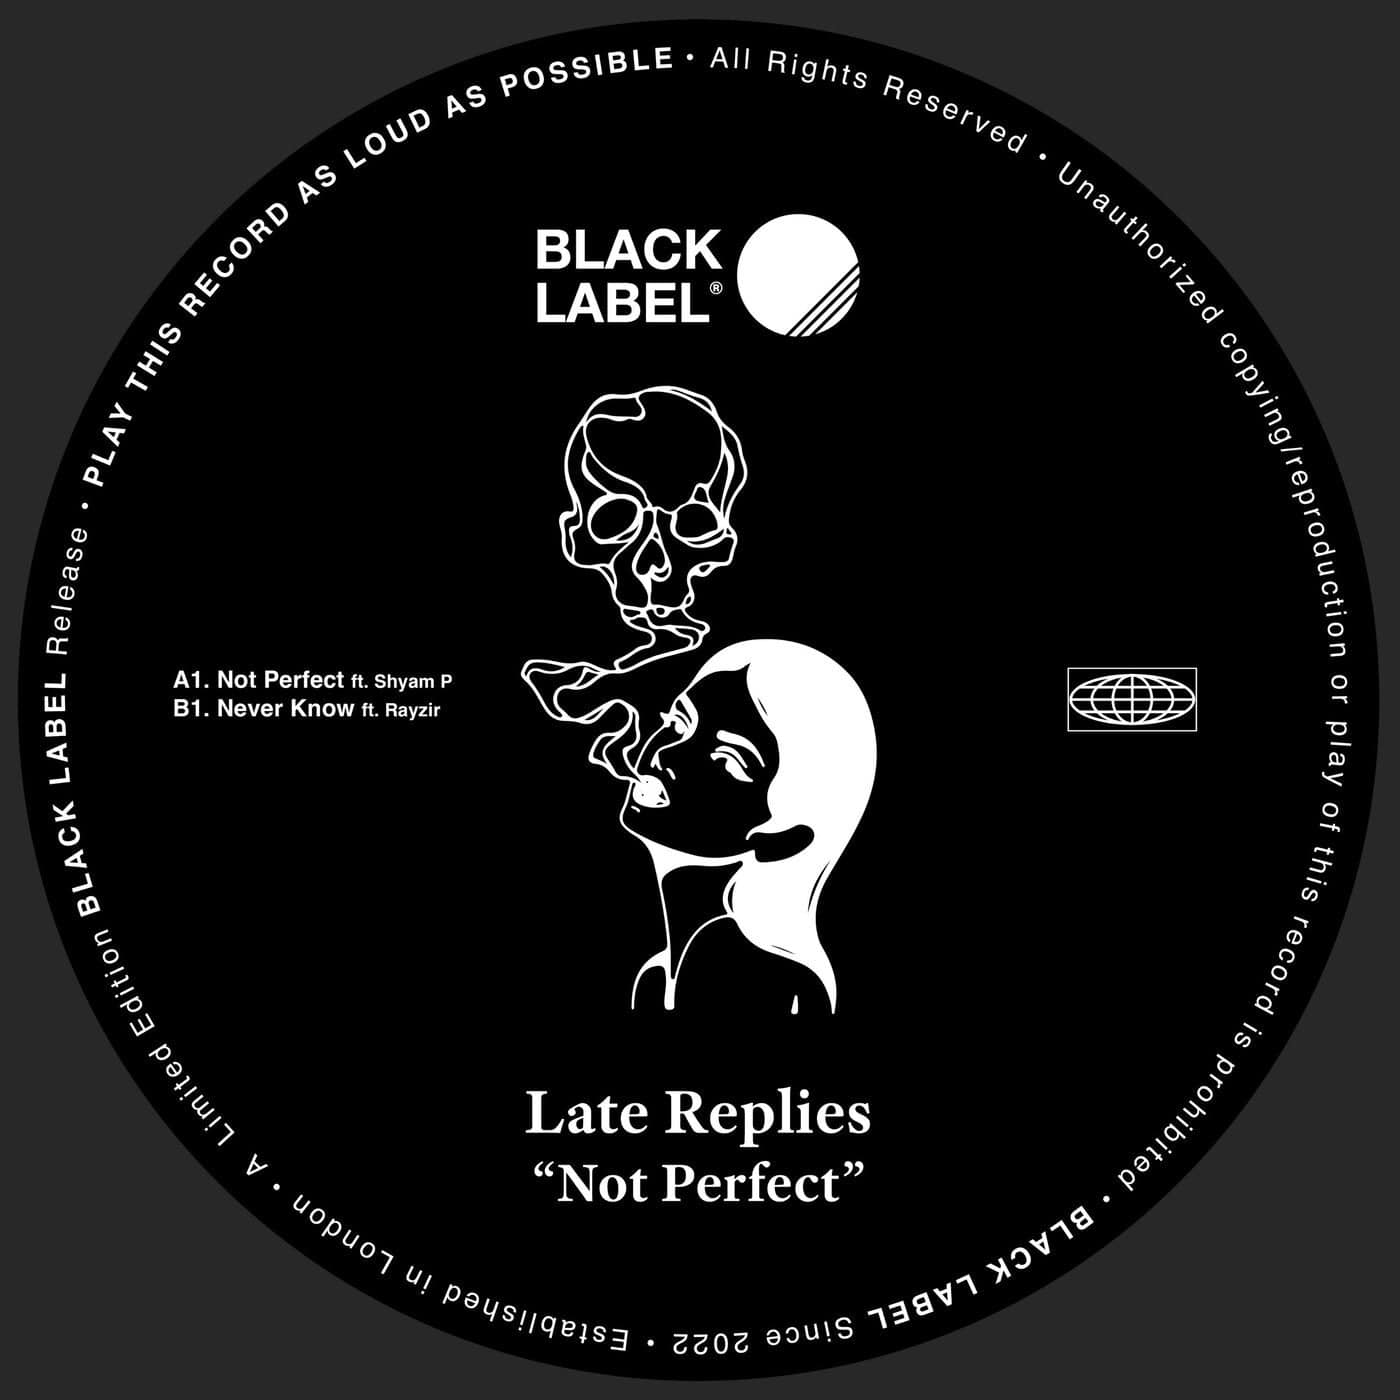 Download Shyam P, Late Replies, RAYZIR - Not Perfect on Electrobuzz